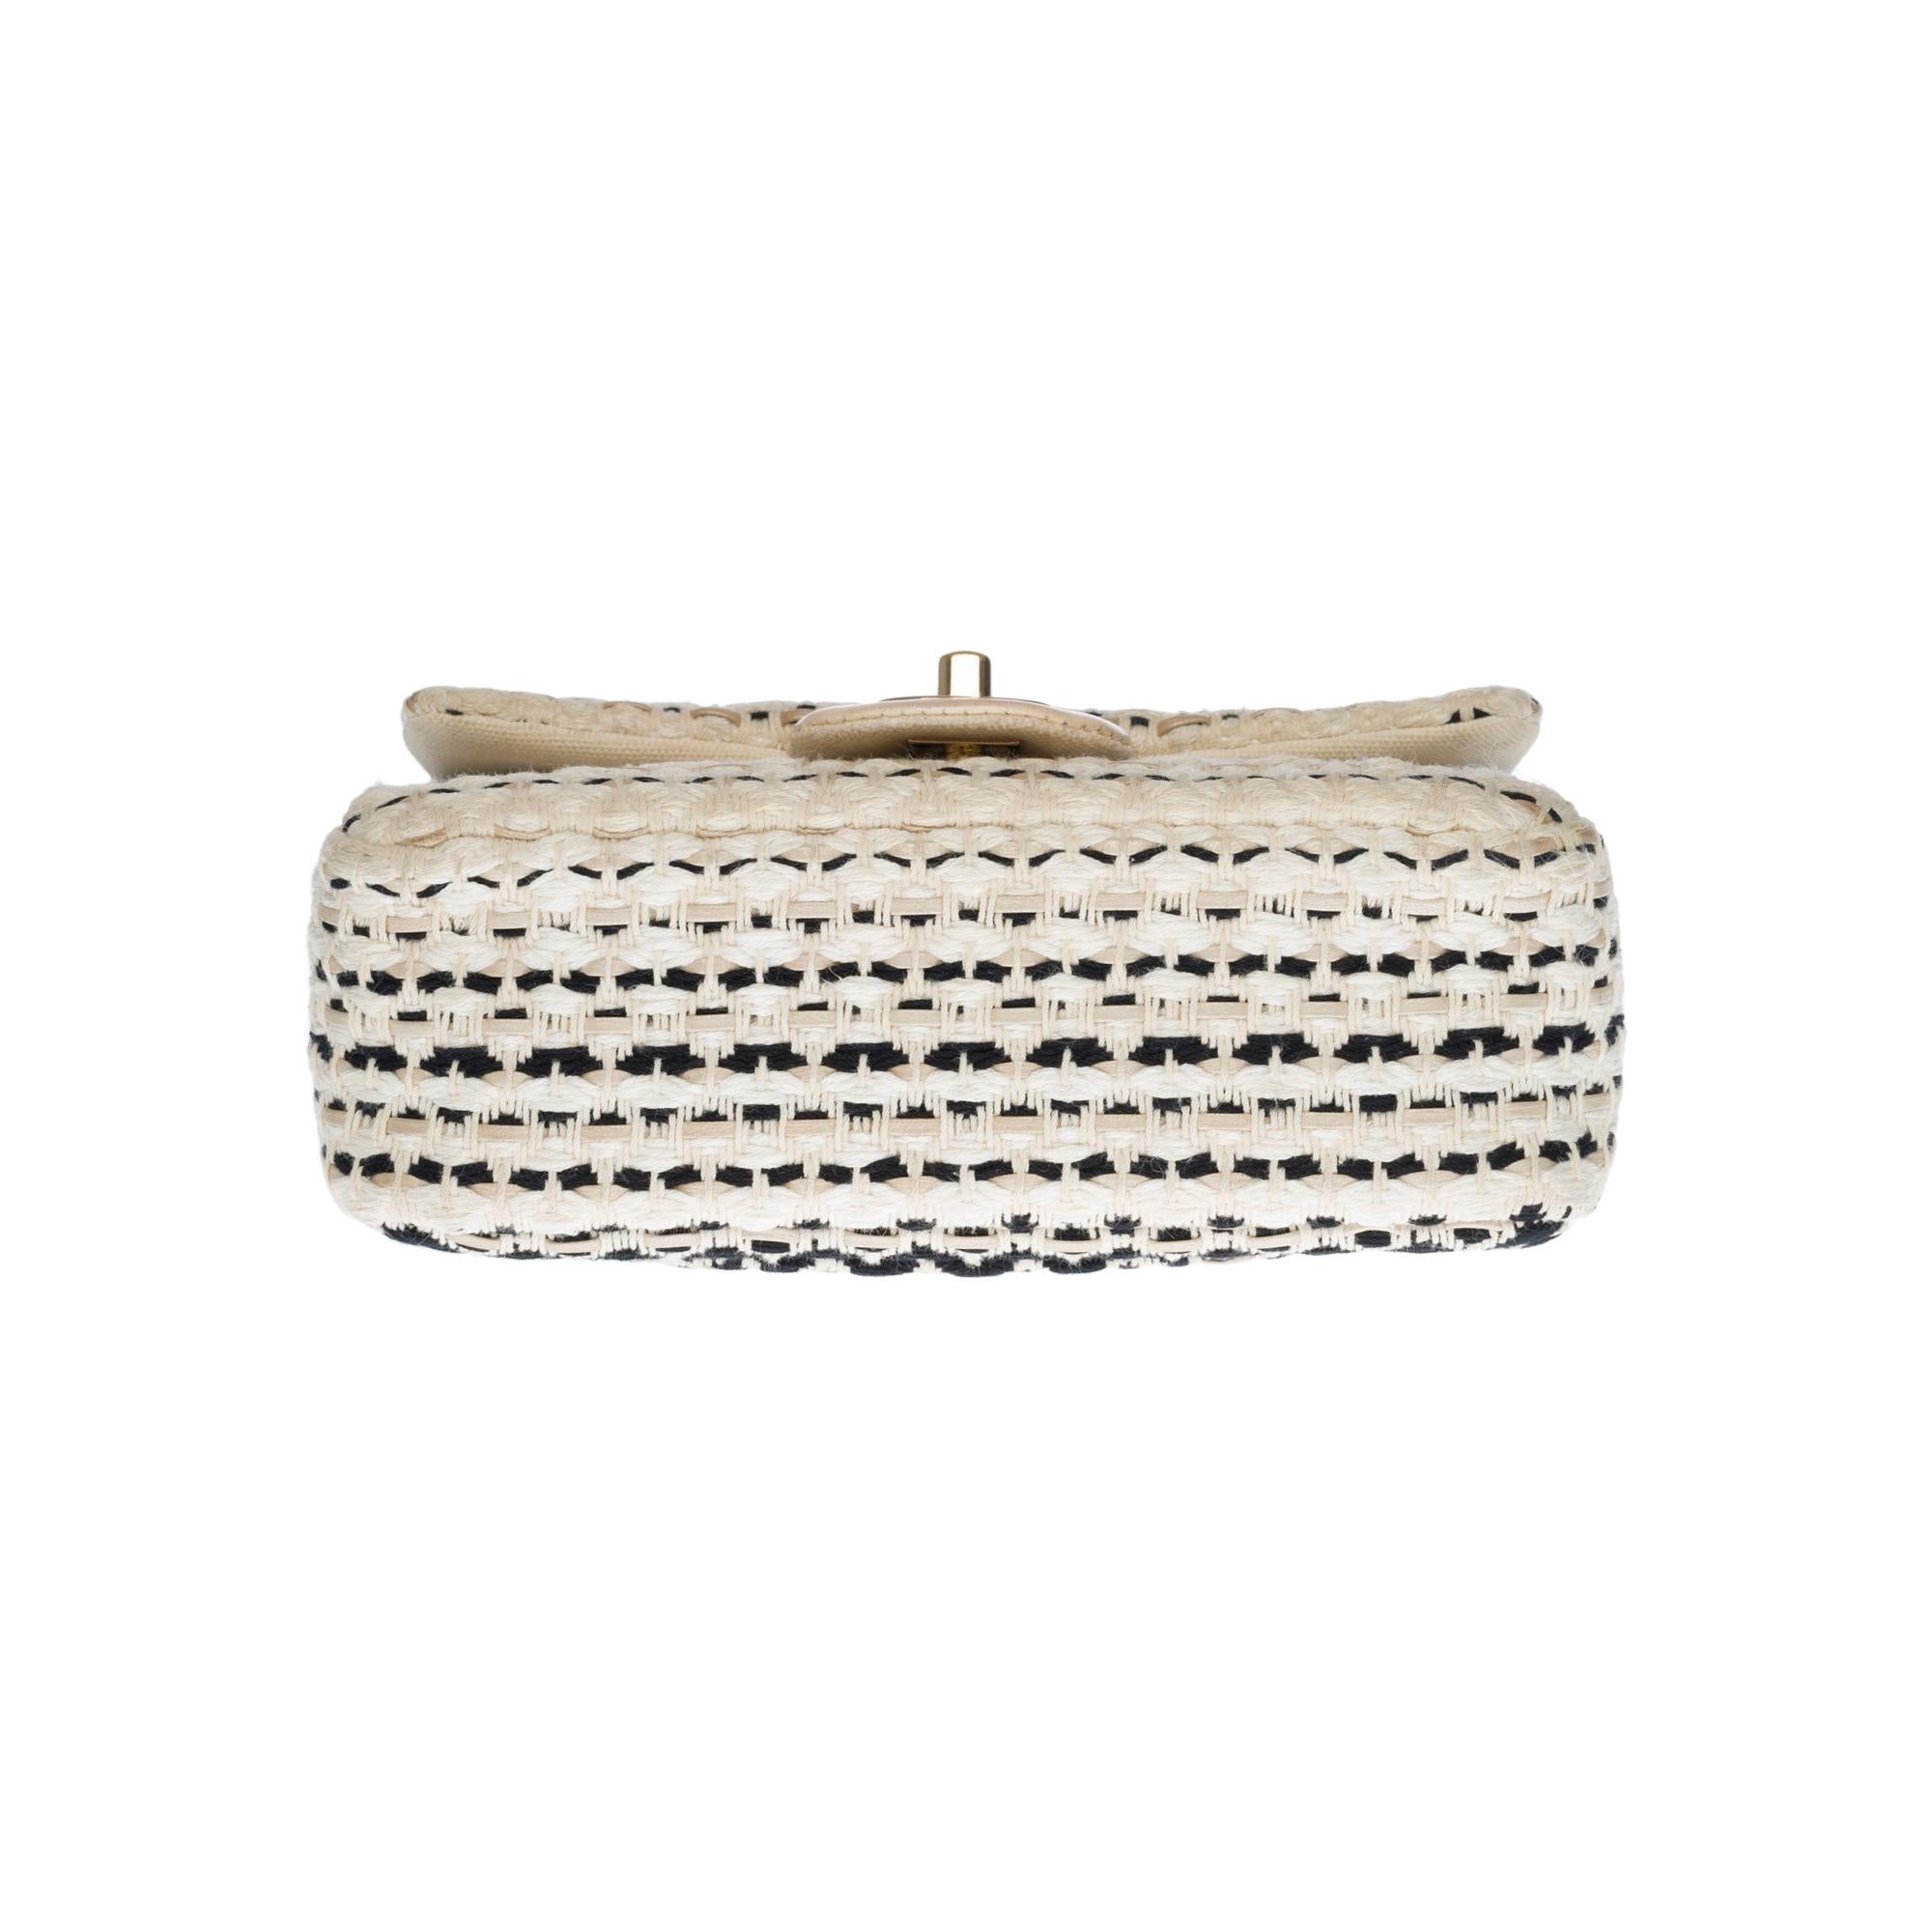 Limited Edition Chanel Mini Timeless Shoulder bag in White & Black Tweed, SHW 3